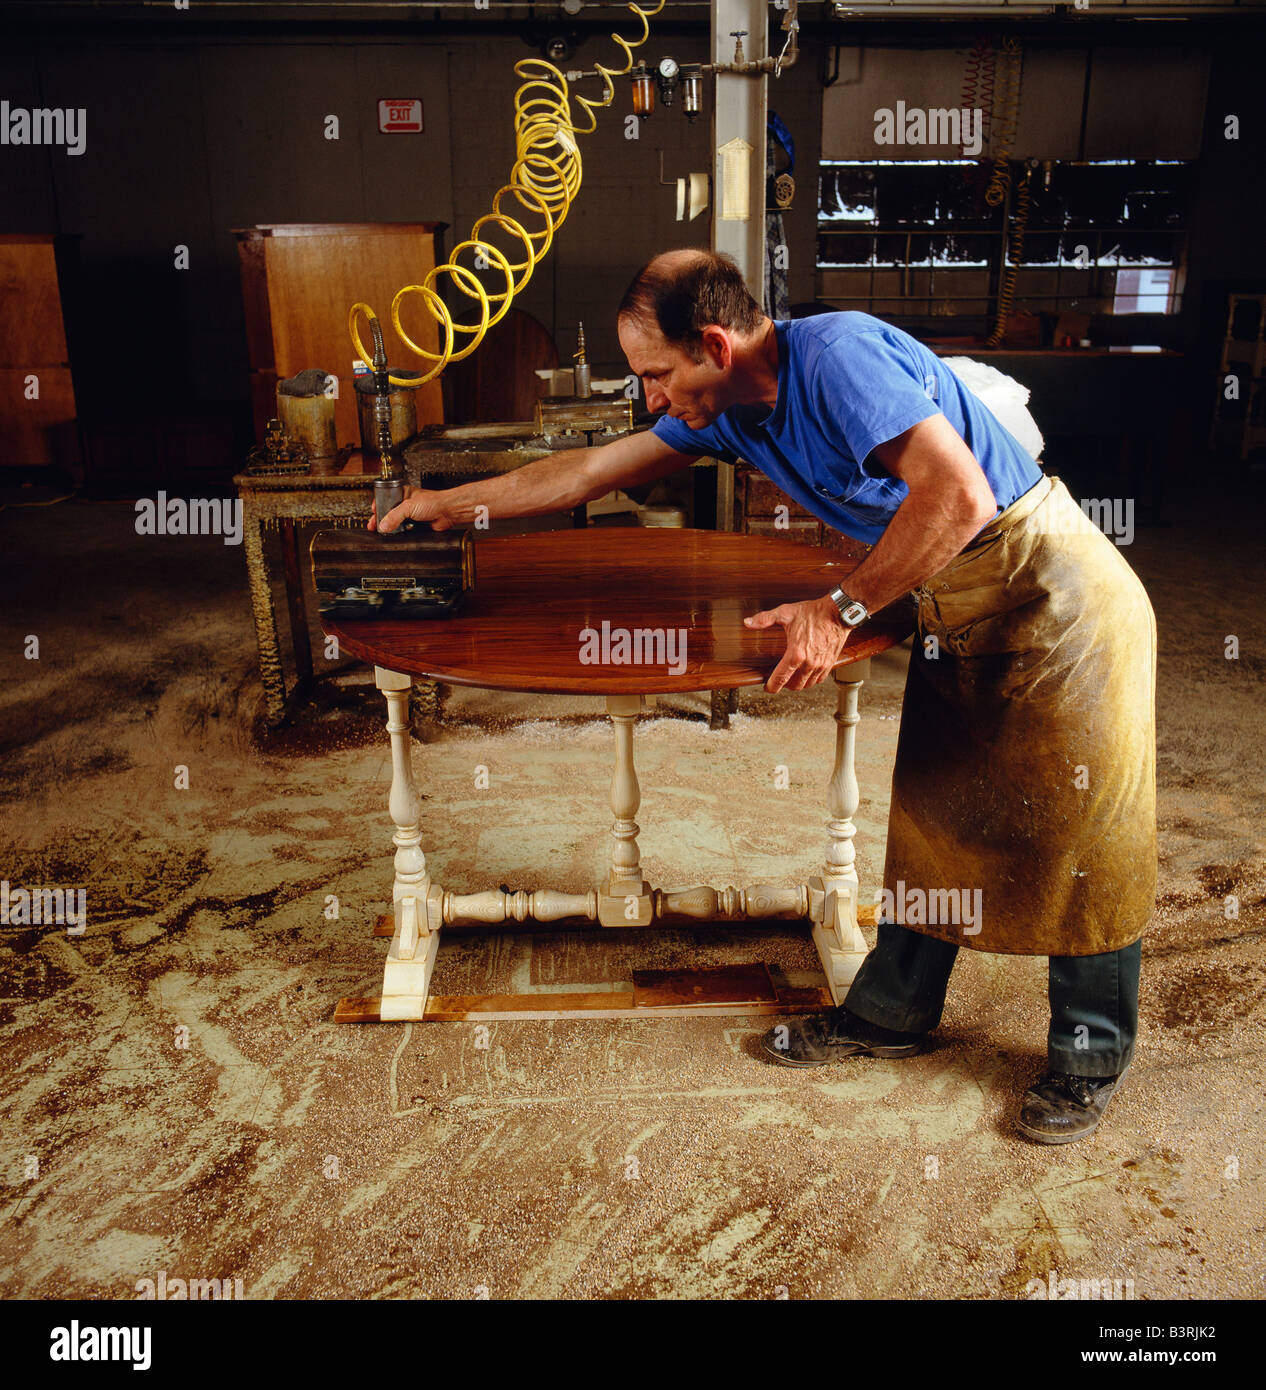 Worker Does The Final Polishing To A Piece Of Furniture